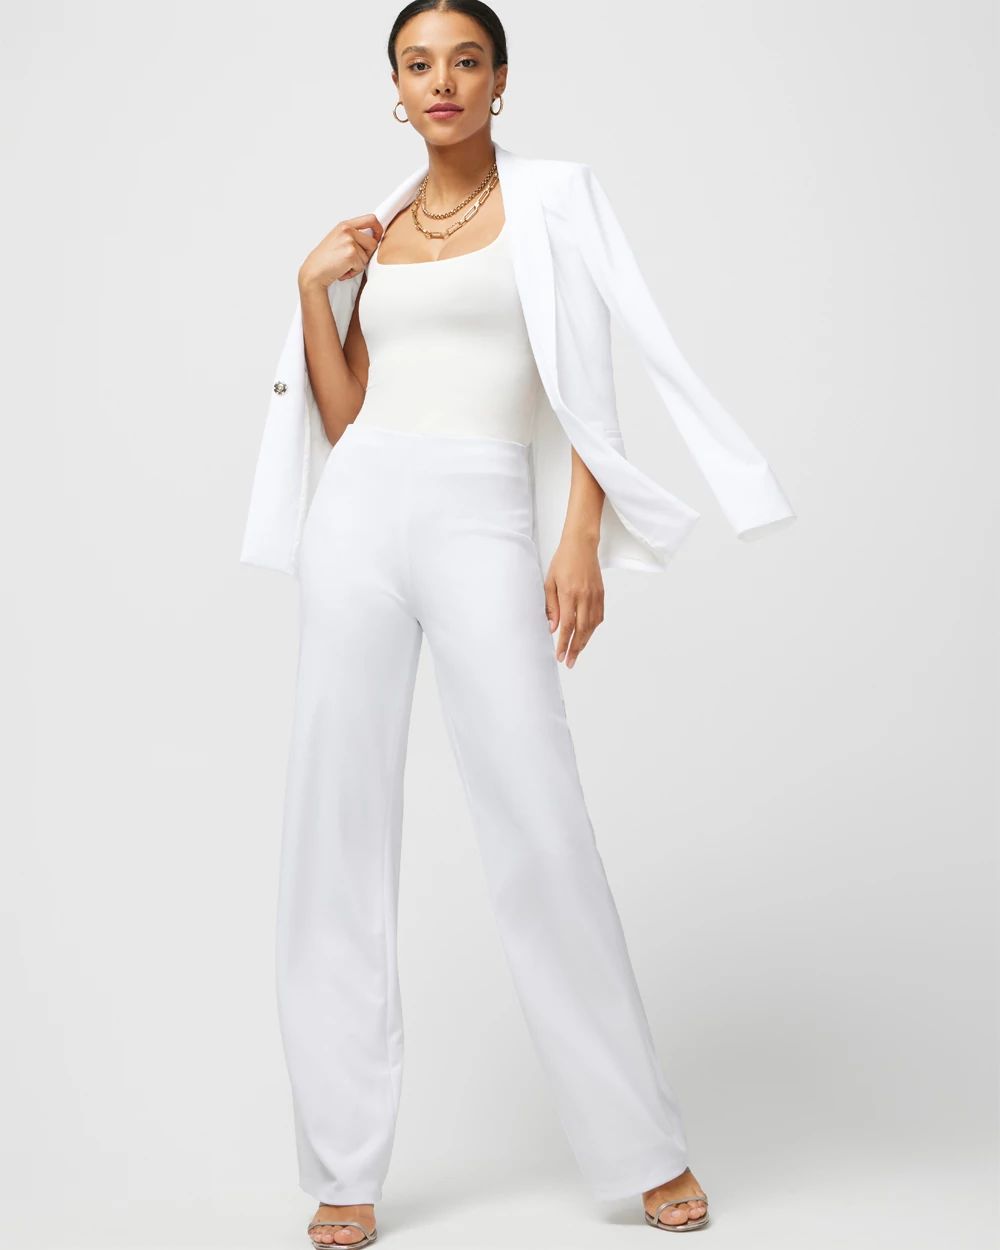 WHBM® Slip On Wide Leg Pant click to view larger image.